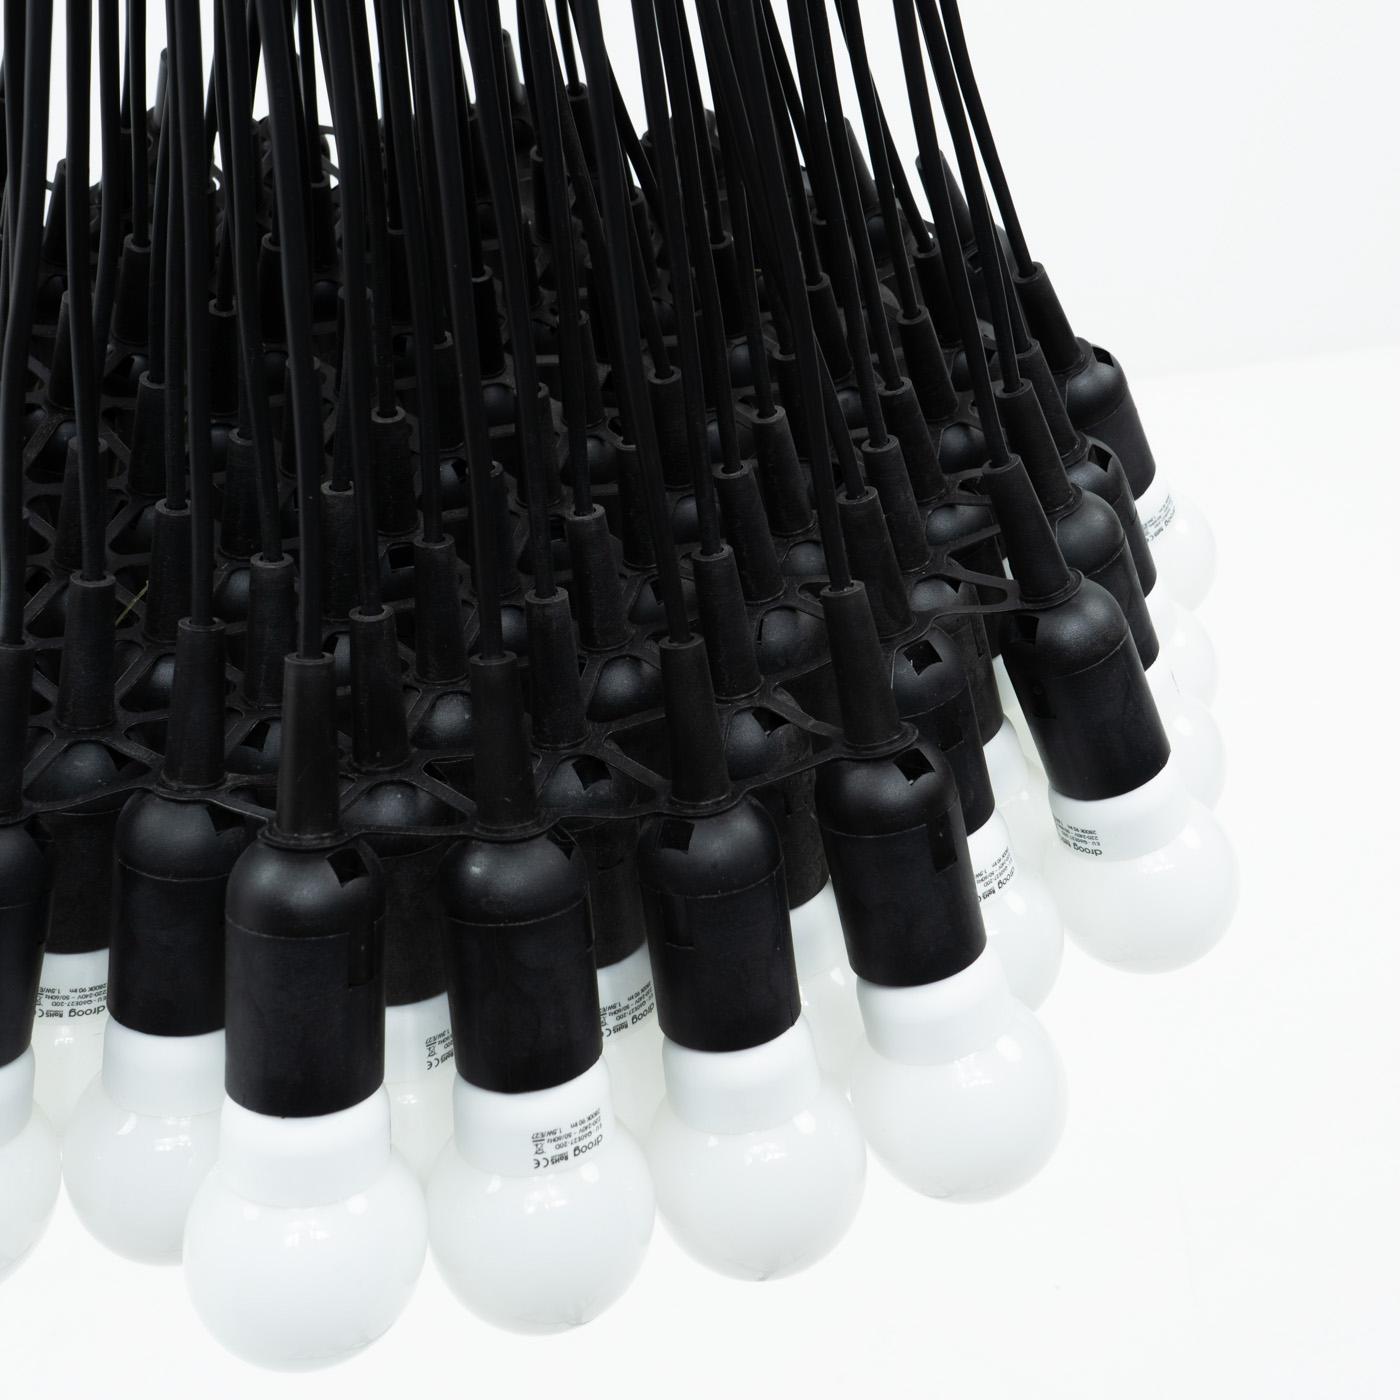 85 LED Lamps, by Rody Graumans for Droog design -  1990s For Sale 3